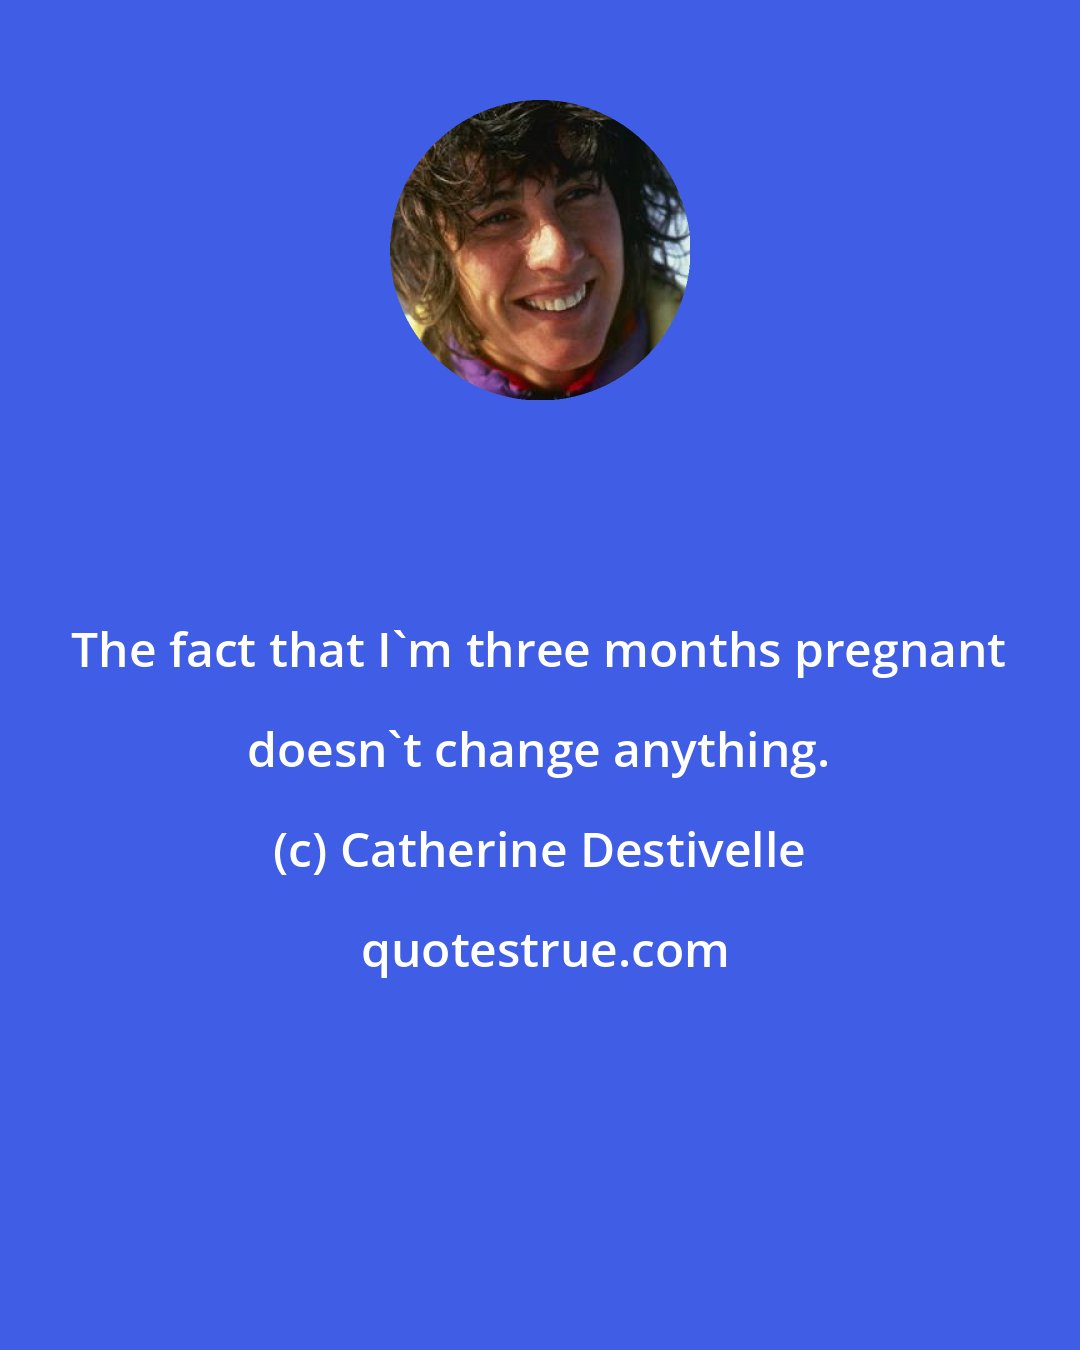 Catherine Destivelle: The fact that I'm three months pregnant doesn't change anything.